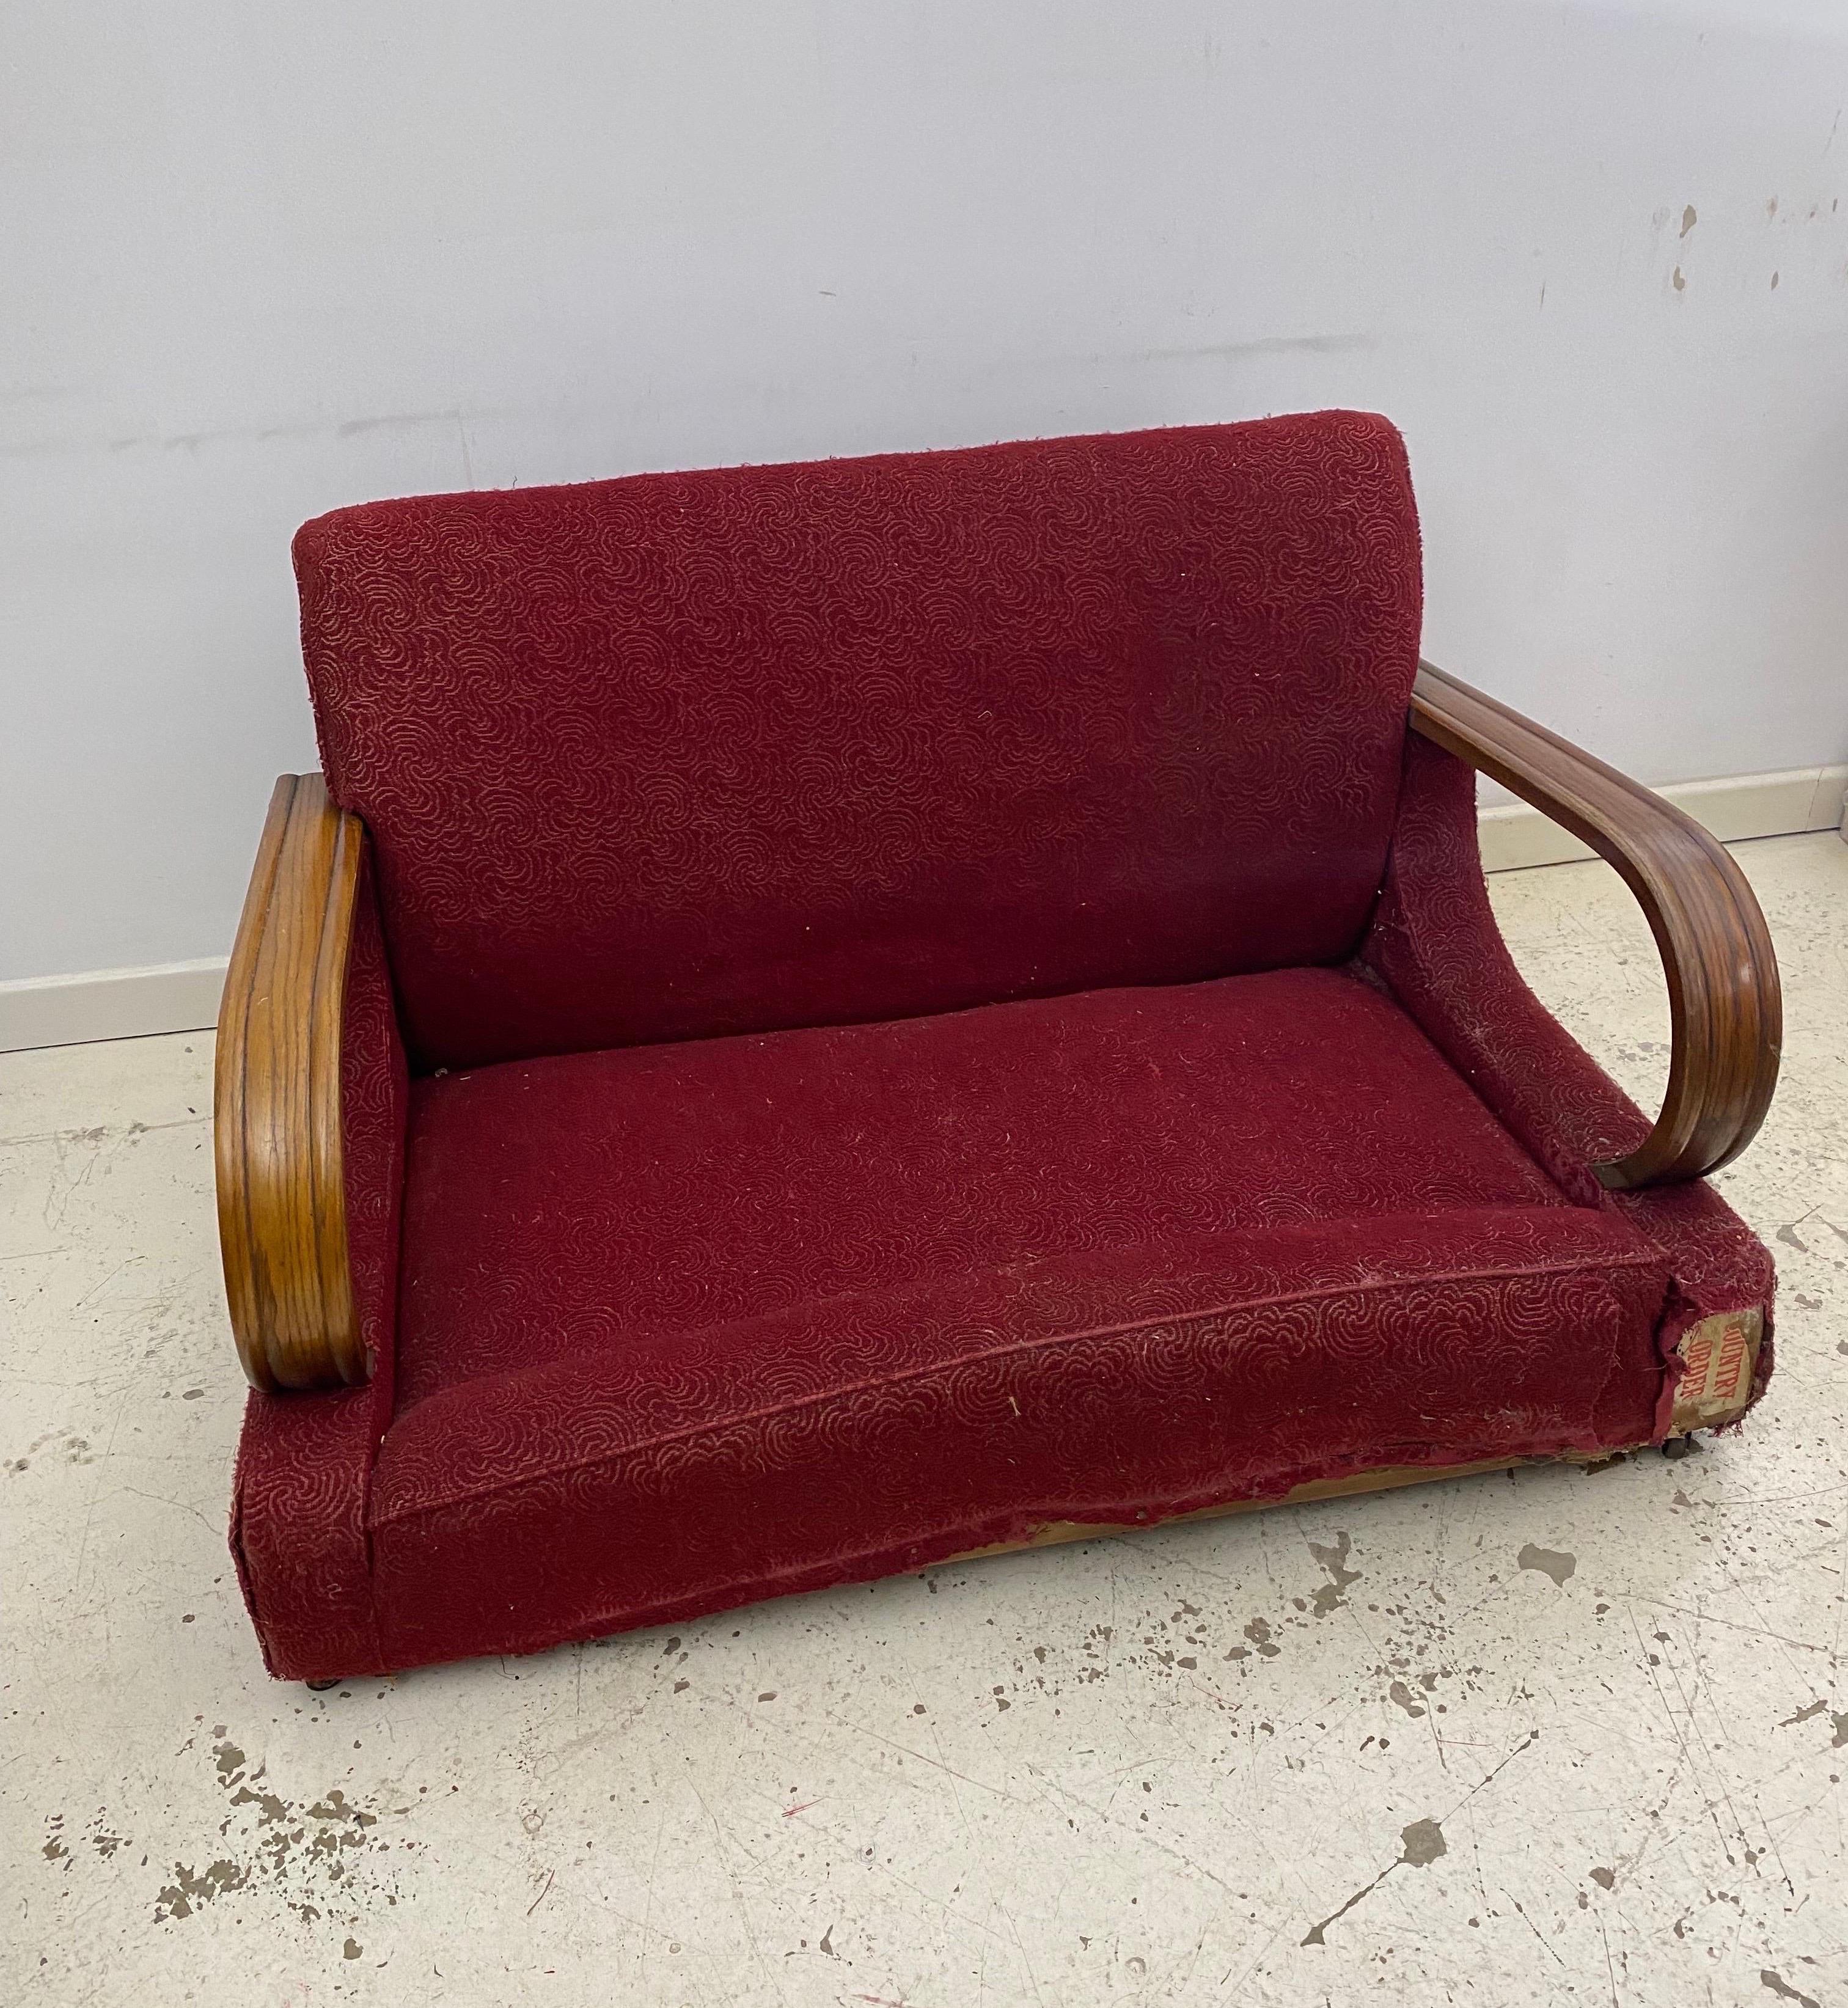 Art Deco 1940s Red Two Seater Distressed Sofa Restoration Project As Seen Poirot For Sale 1